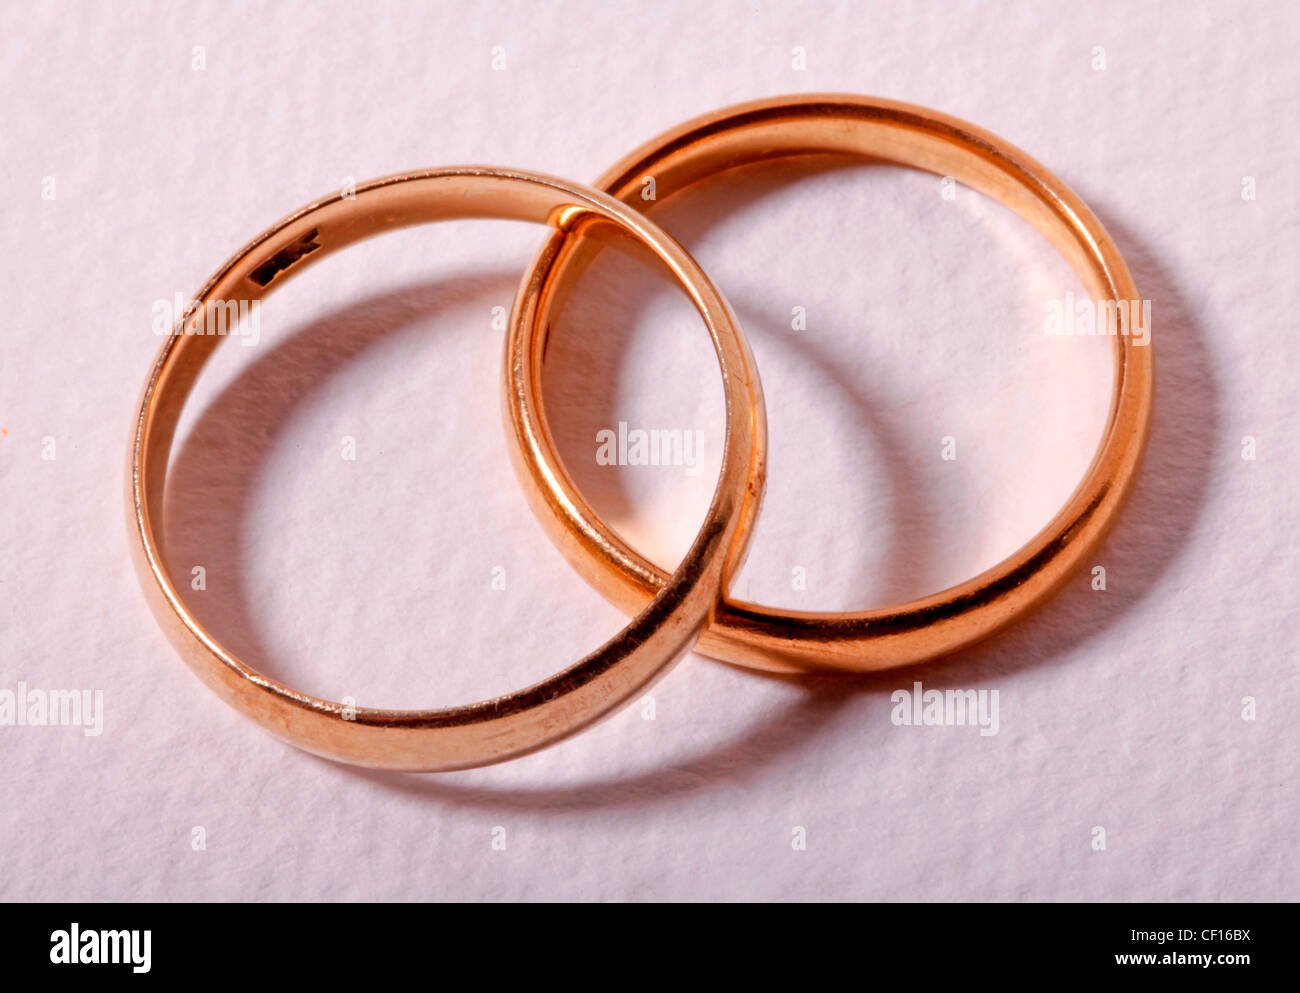 GOLD WEDDING RINGS OR BANDS Stock Photo